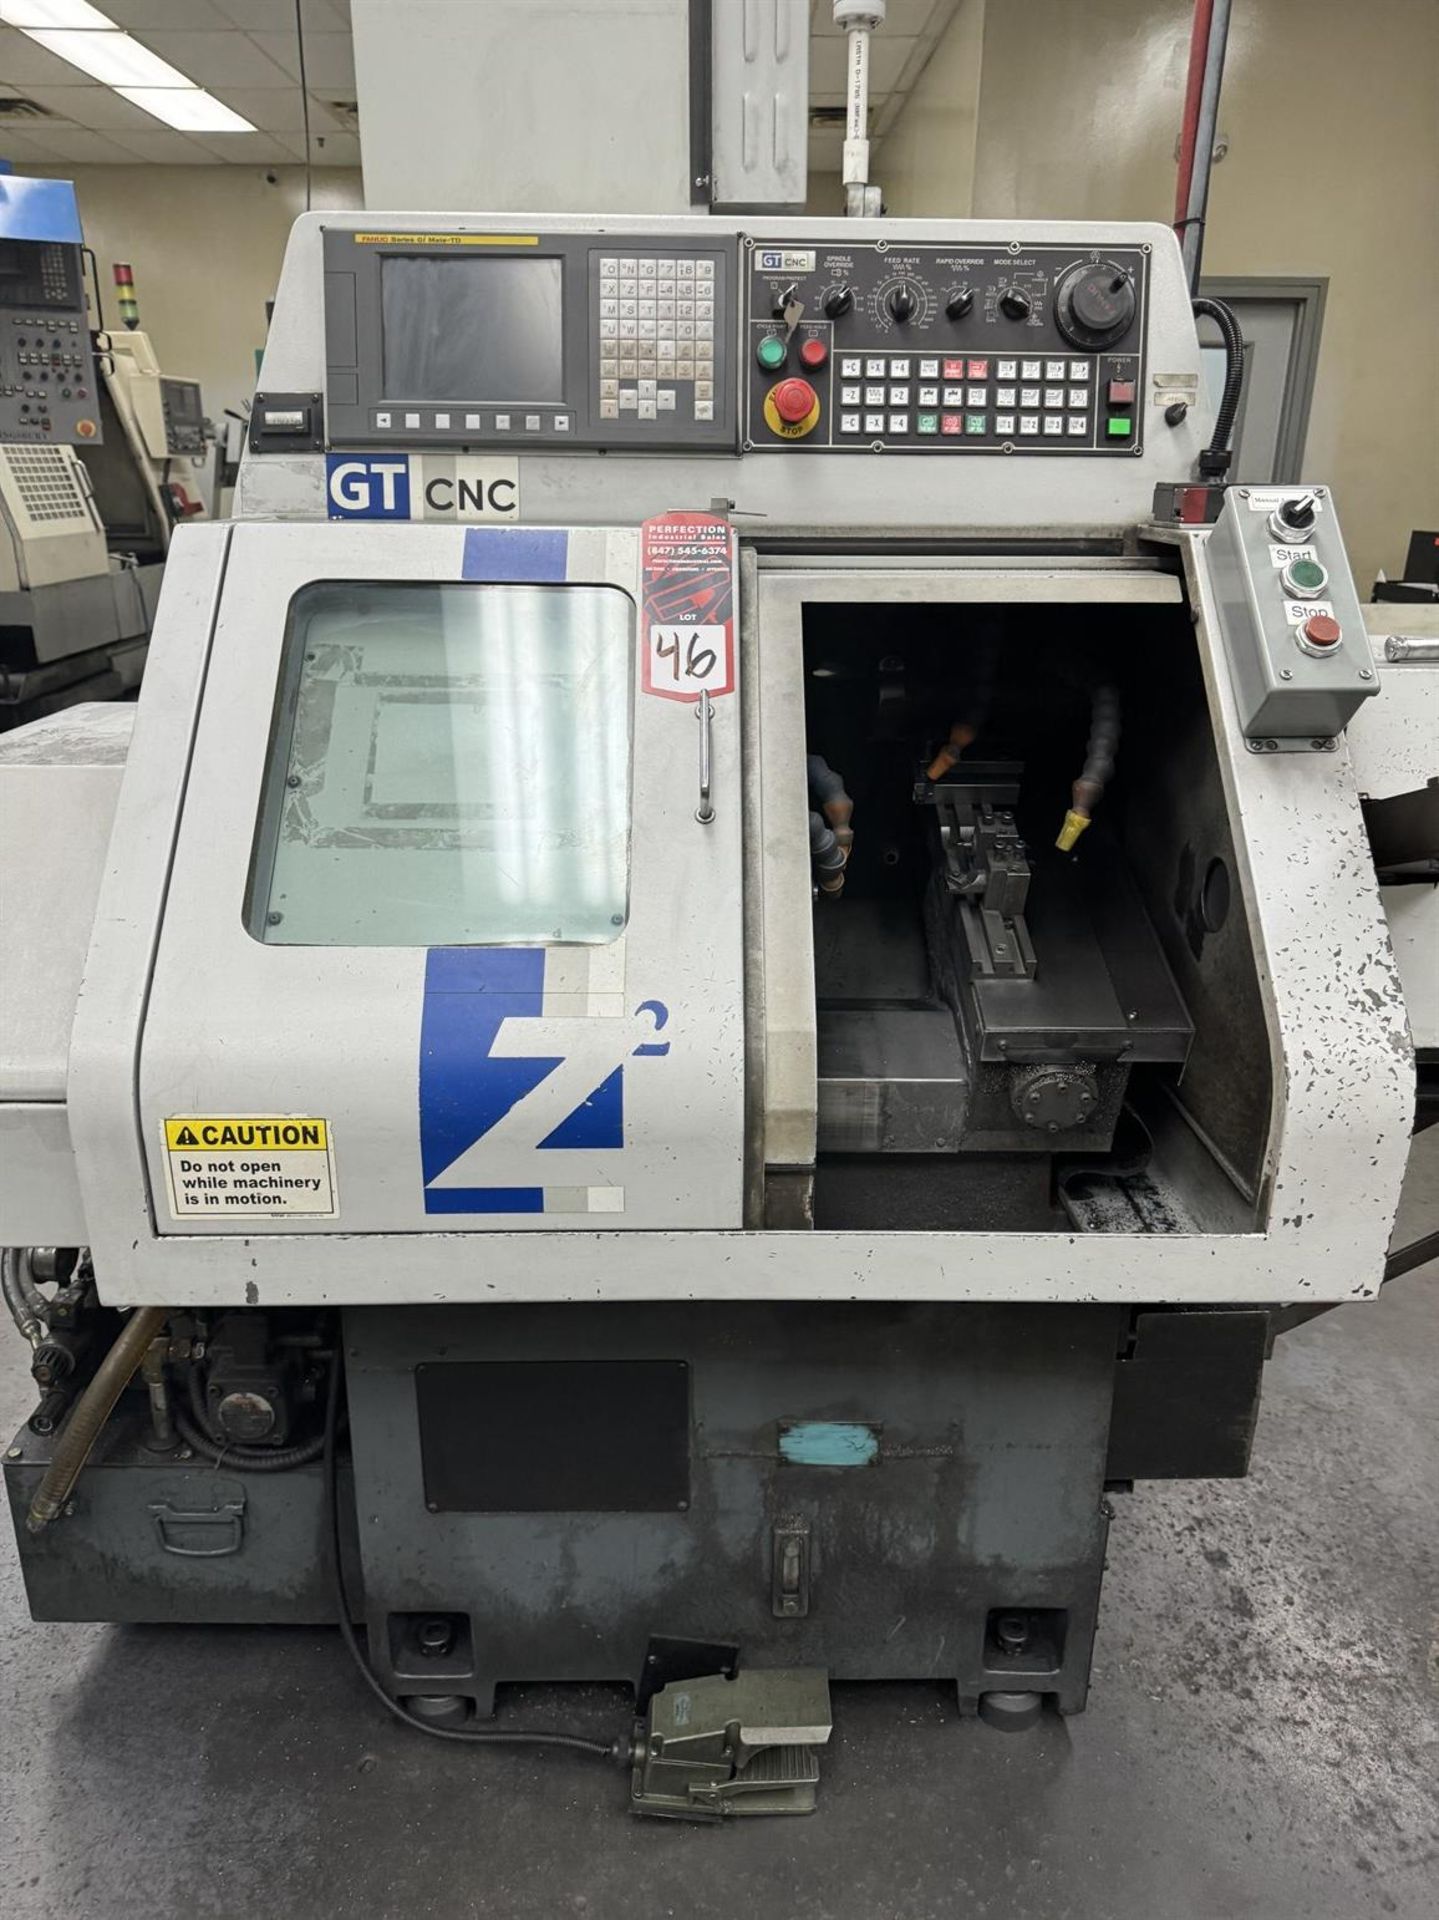 CUBIC GT Z2 CNC Gang Tool Lathe, s/n na, Fanuc Series Oi Mate-TD Control, 60mm Turning Dia, 120mm Sw - Image 3 of 7